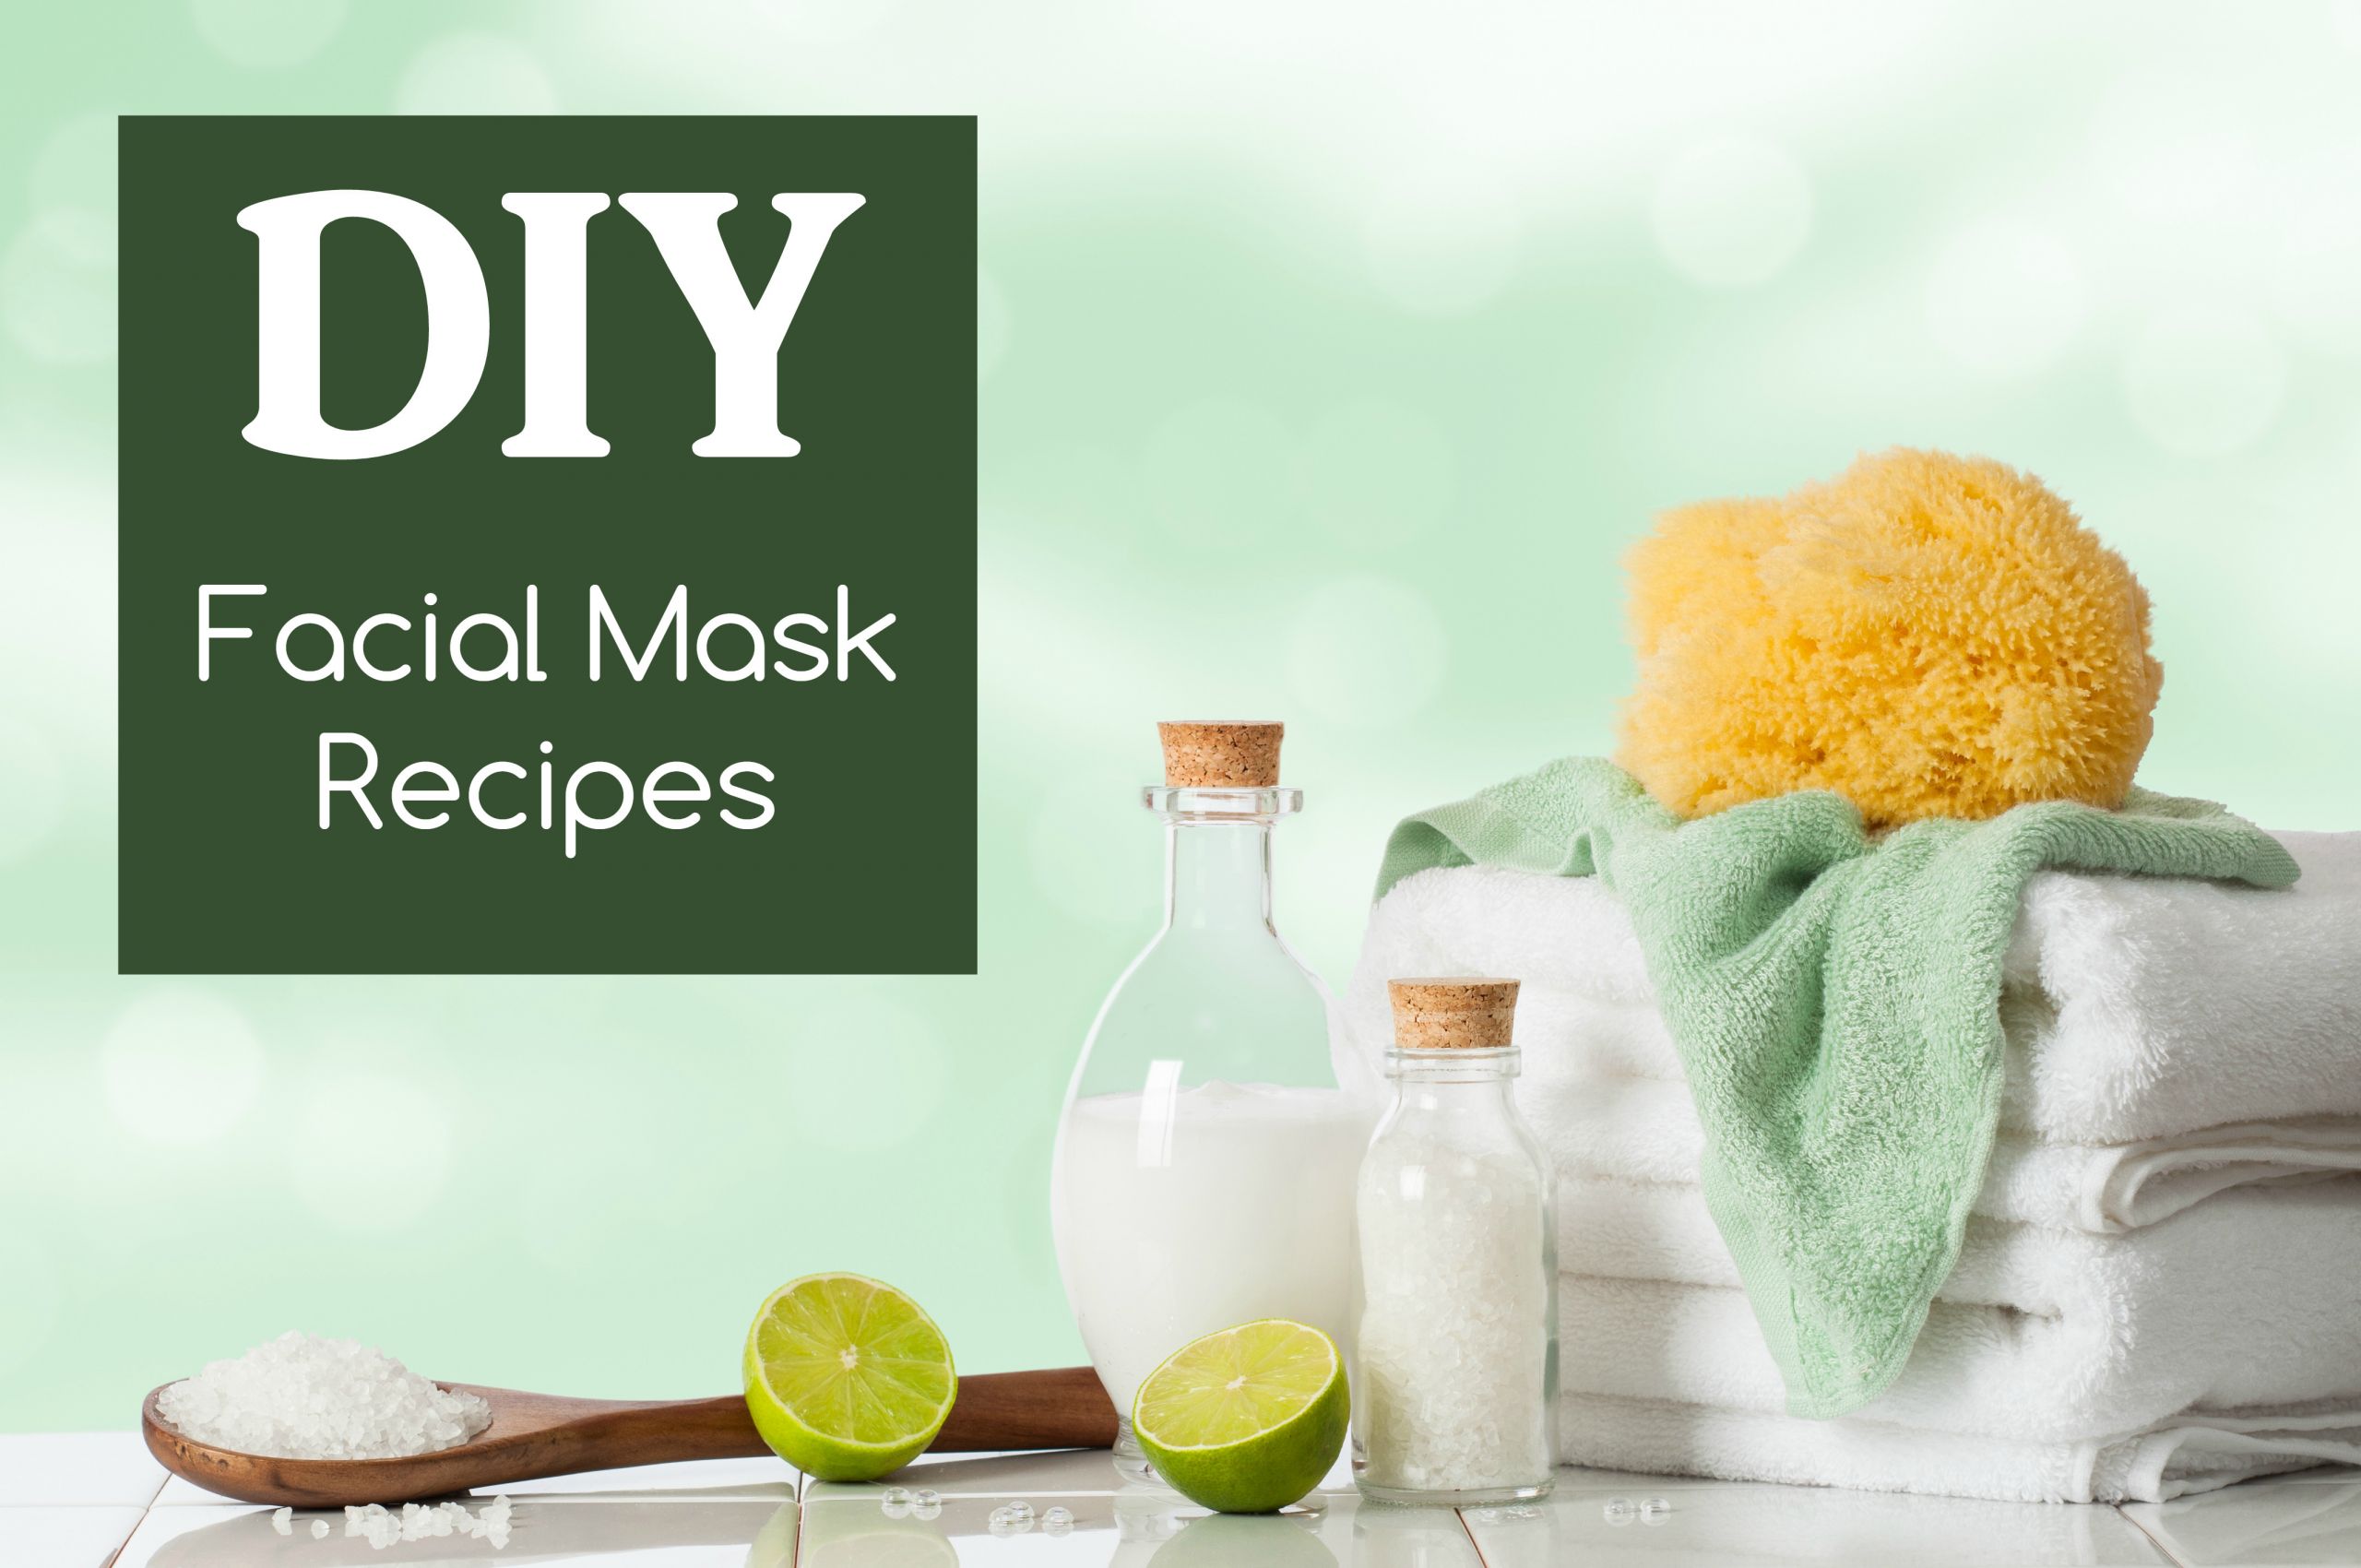 DIY Facial Mask Recipes
 DIY Facial Mask Recipes For Different Skin Types